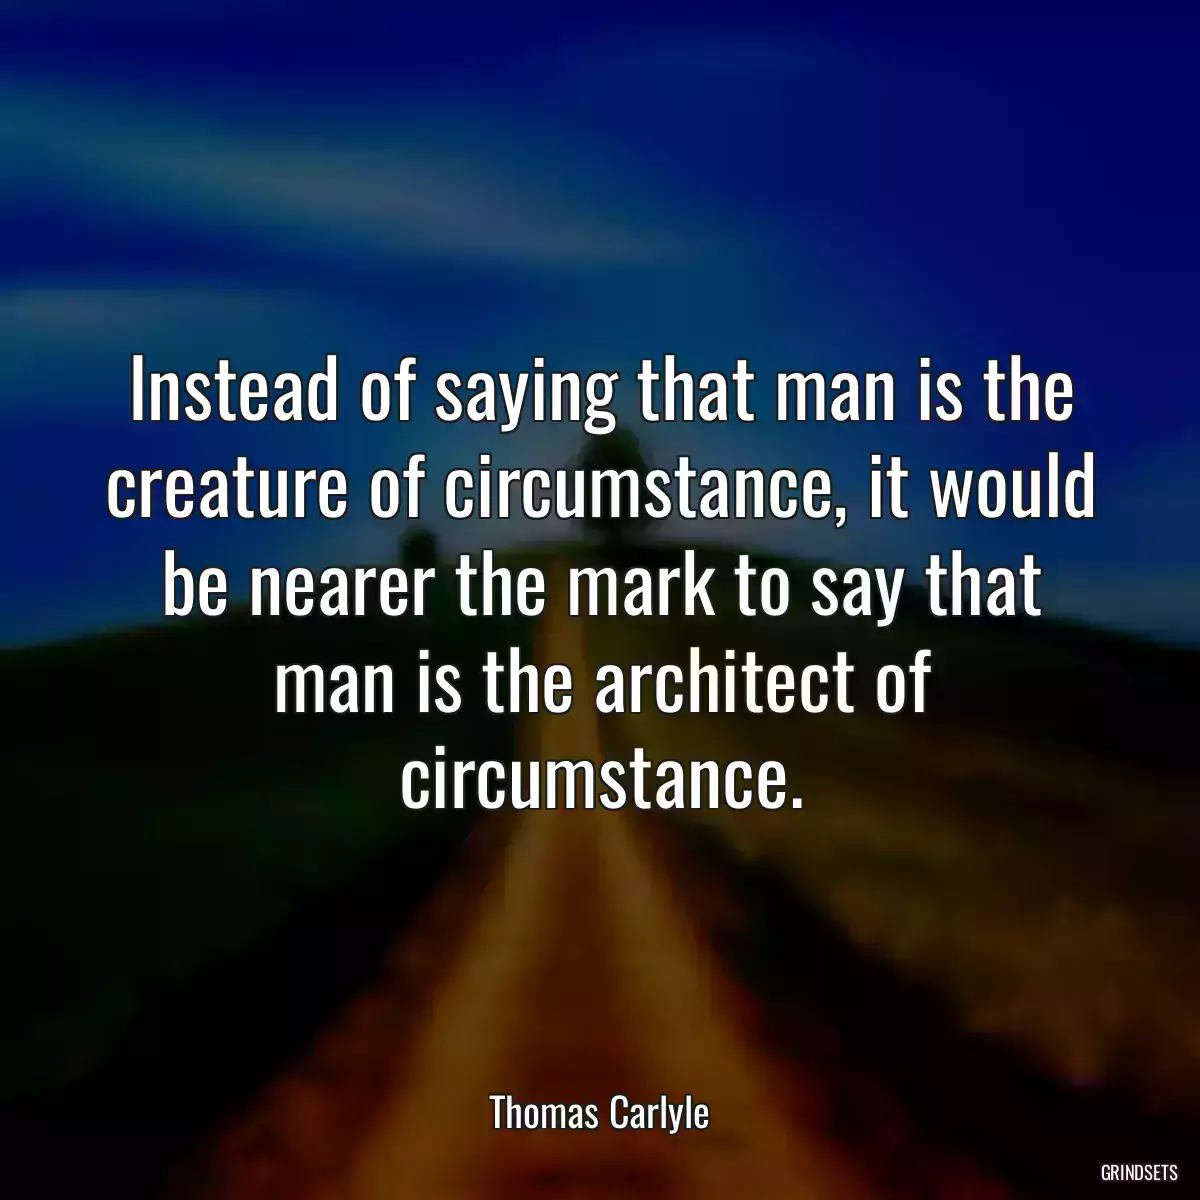 Instead of saying that man is the creature of circumstance, it would be nearer the mark to say that man is the architect of circumstance.